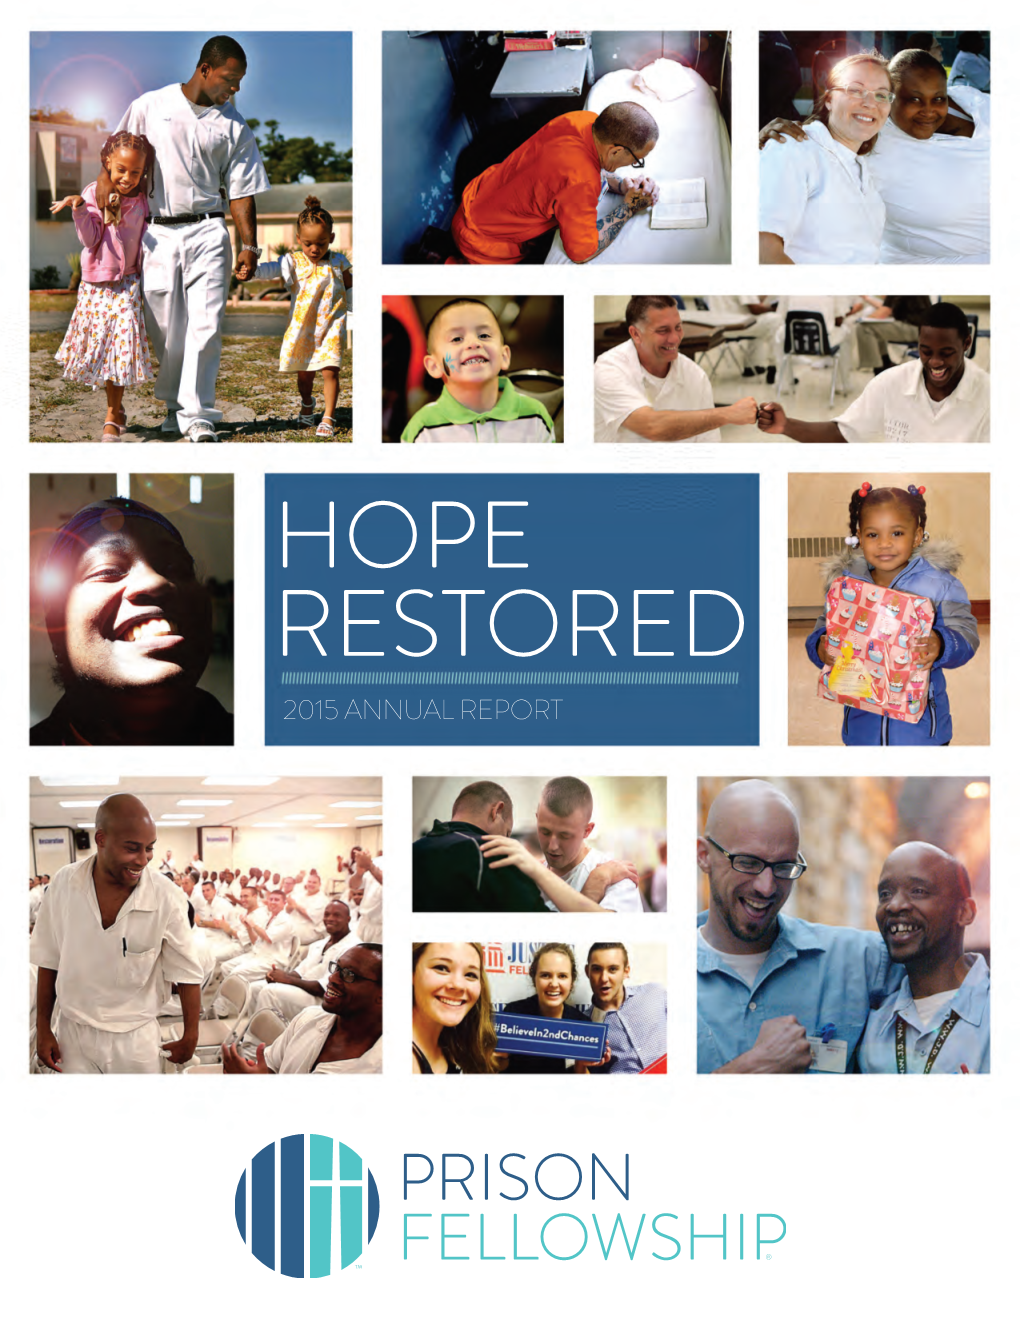 Hope Restored 2015 Annual Report Greetings from the Board